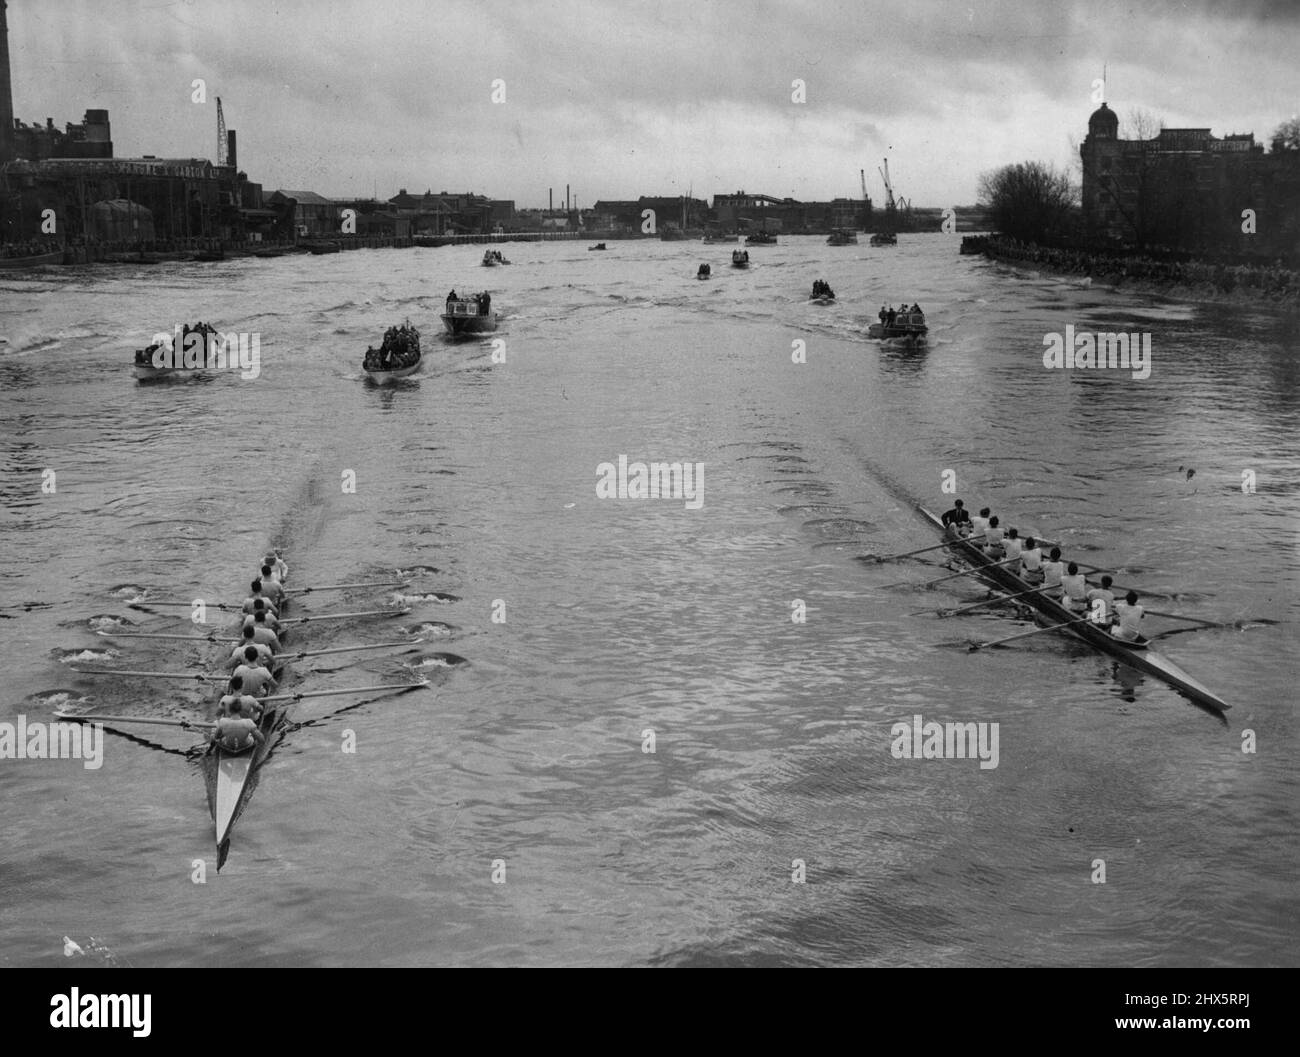 The Boat Race -- Cambridge won the Boat Race today by a margin of about 12 lengths over Oxford. The Crews about to shoot Hammersmith Bridge. This is where Cambridge (left) went into the lead. March 6, 1955. Stock Photo